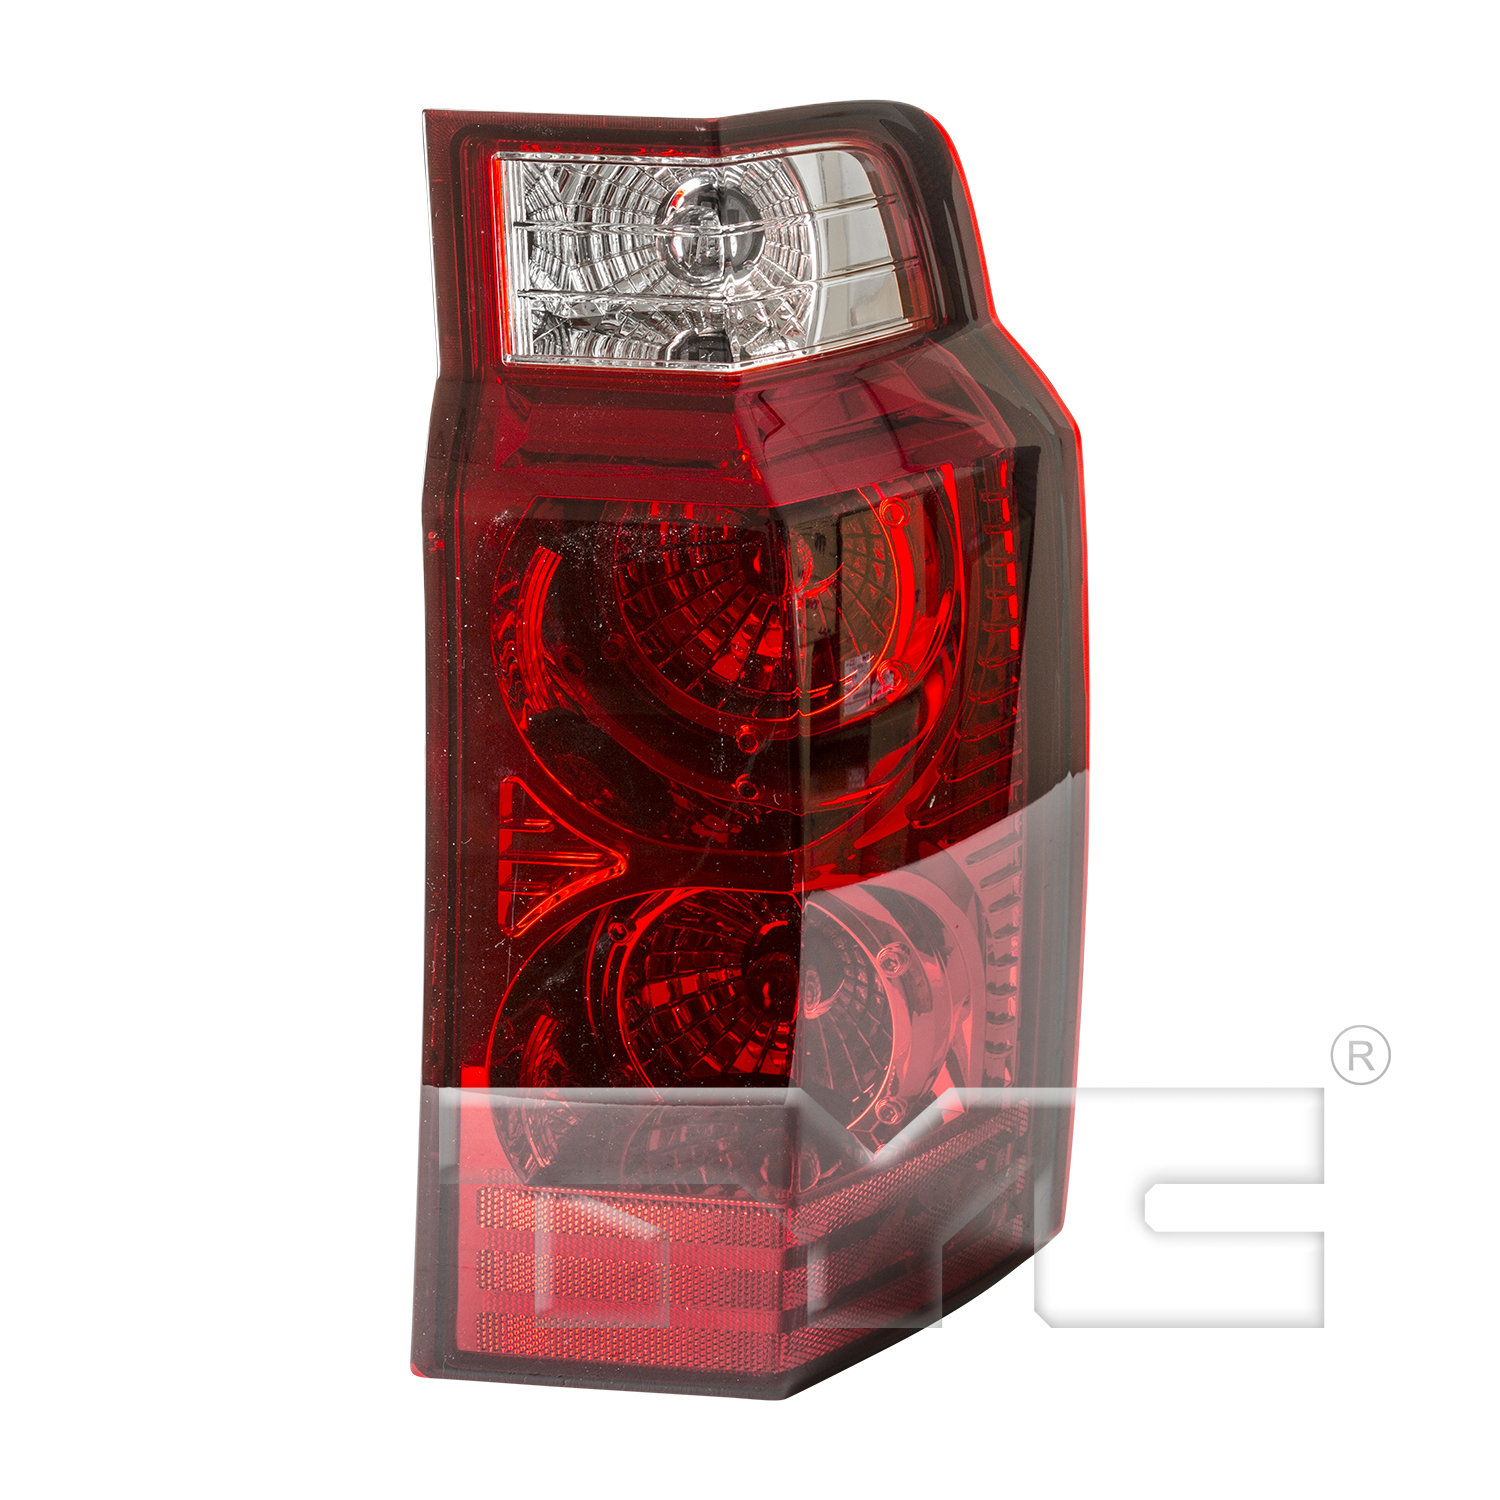 Aftermarket TAILLIGHTS for JEEP - COMMANDER, COMMANDER,06-10,RT Taillamp lens/housing